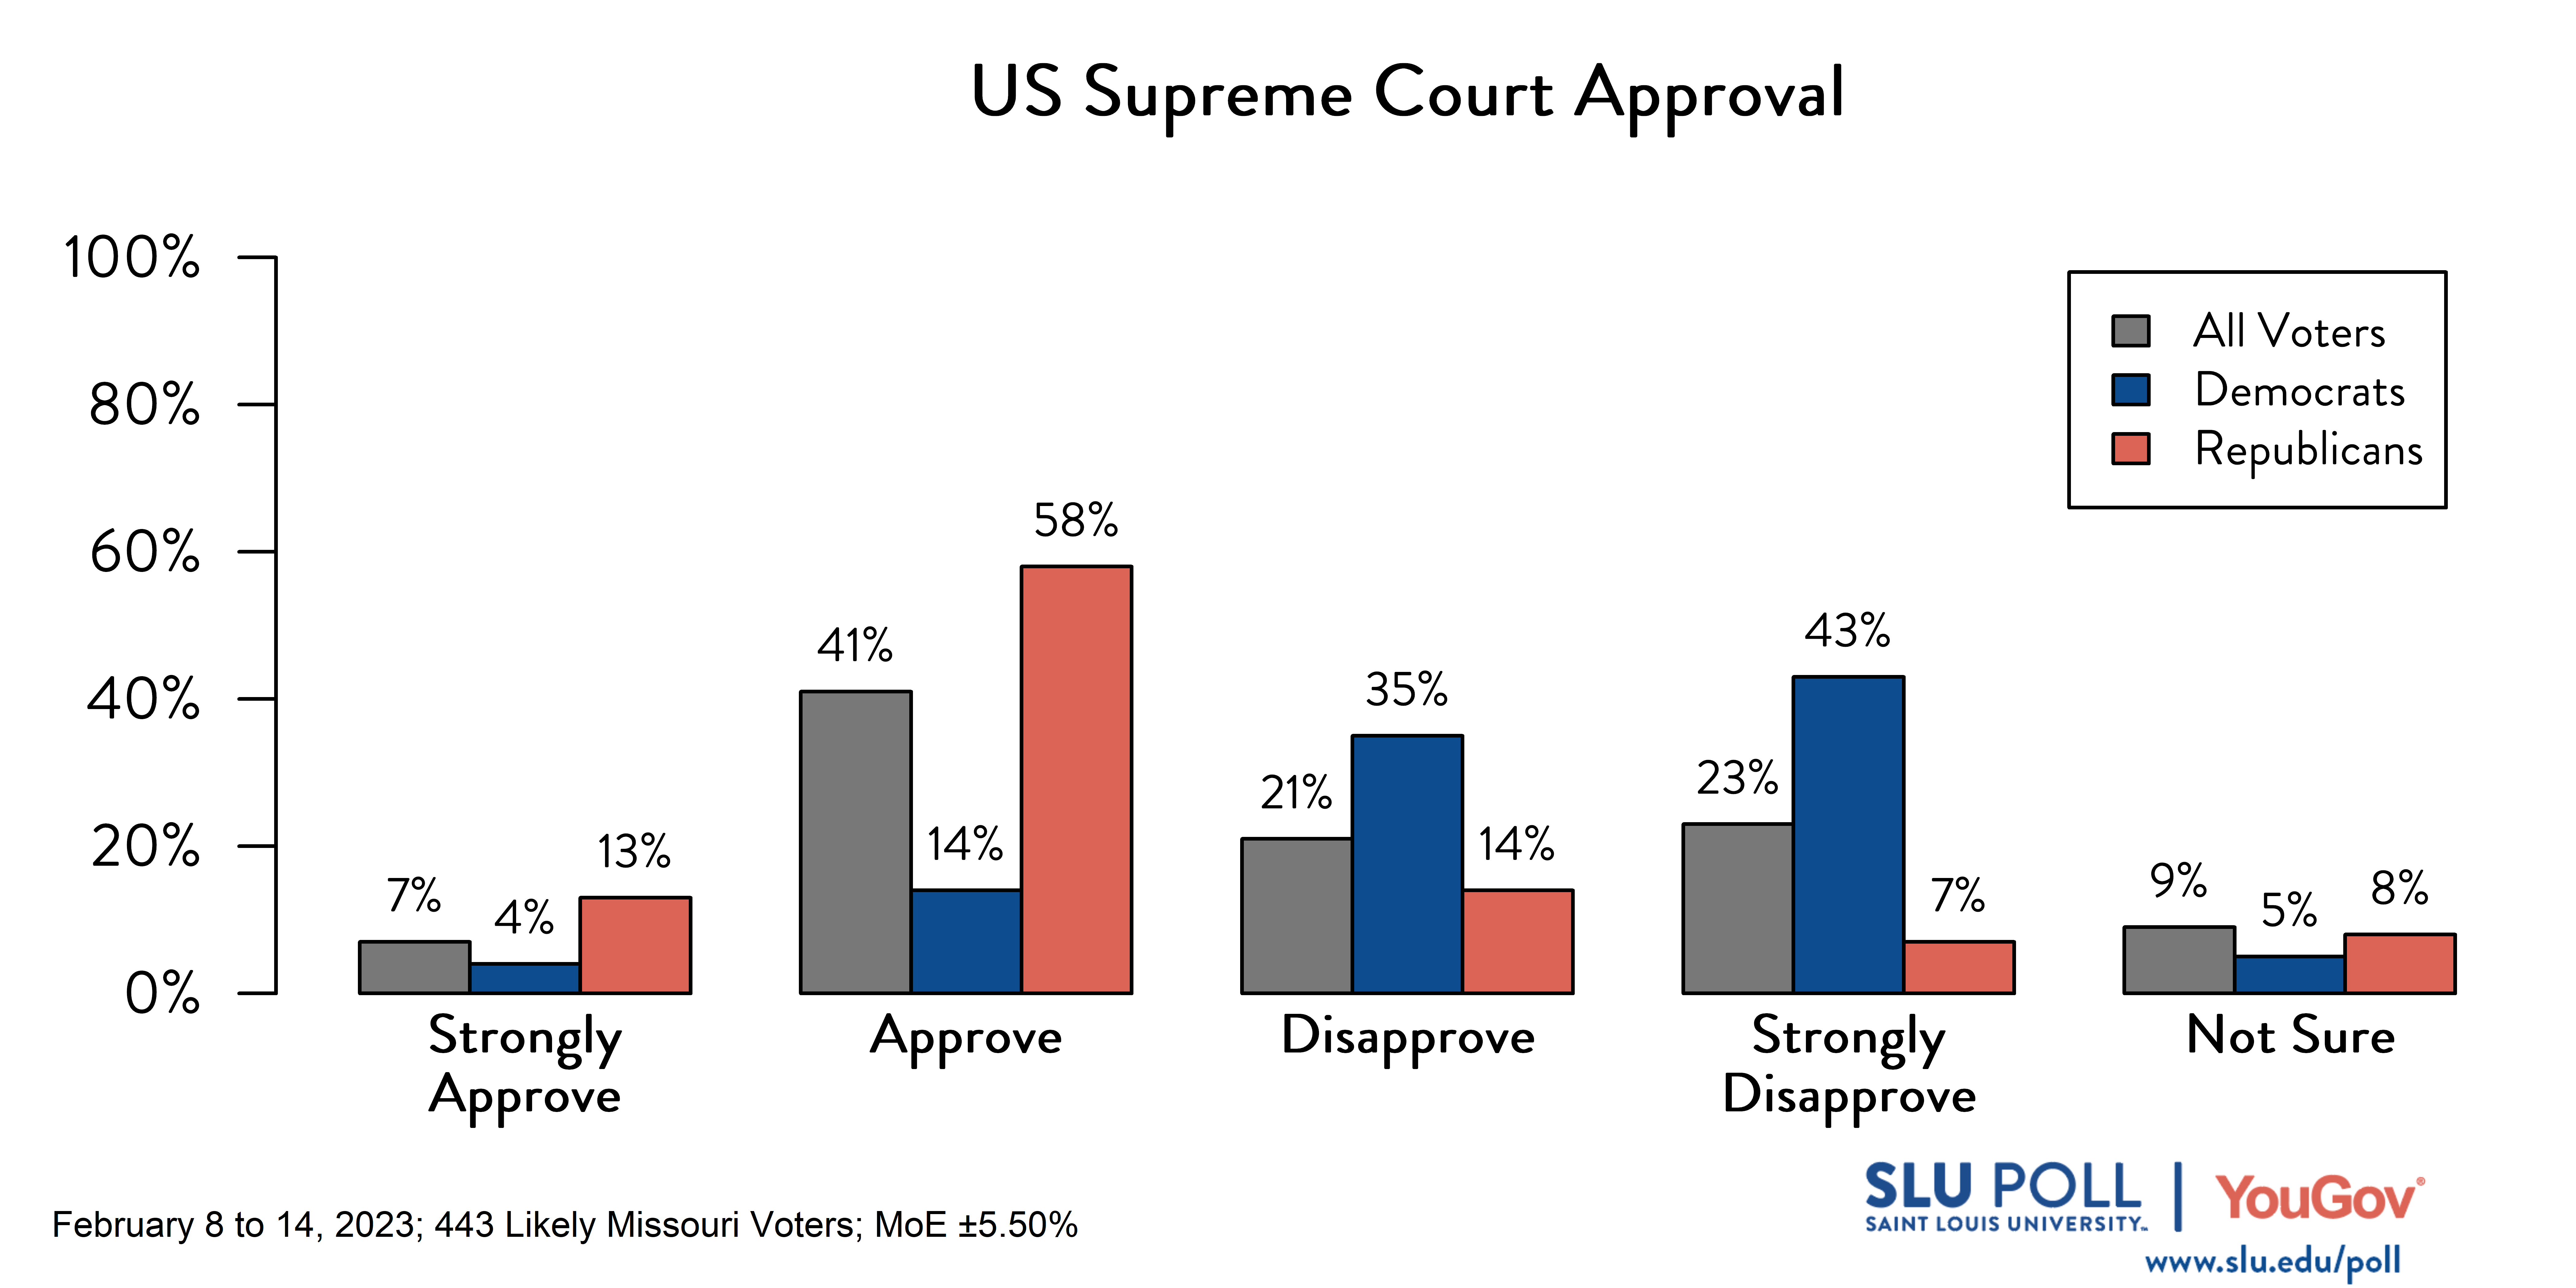 Likely voters' responses to 'Do you approve or disapprove of the way each is doing their job: The US Supreme Court?': 7% Strongly approve, 41% Approve, 21% Disapprove, 23% Strongly disapprove, and 9% Not sure. Democratic voters' responses: ' 4% Strongly approve, 14% Approve, 35% Disapprove, 43% Strongly disapprove, and 5% Not sure. Republican voters' responses: 13% Strongly approve, 58% Approve, 14% Disapprove, 7% Strongly disapprove, and 8% Not sure. 